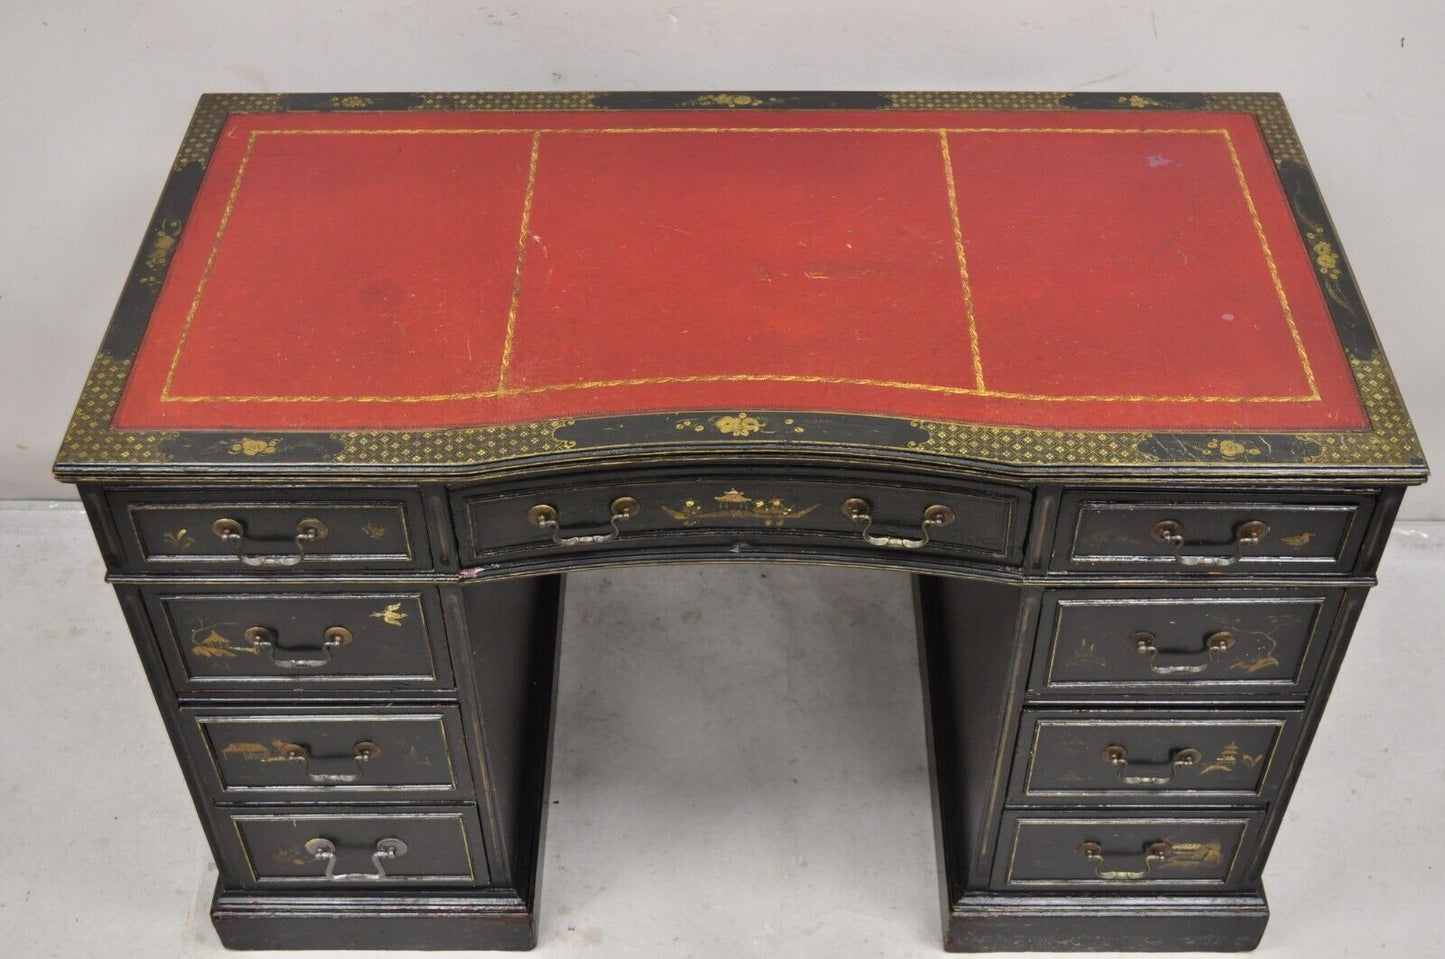 Vintage Chinoiserie Black Chinese Painted Red Leather Top Kneehole Writing Desk